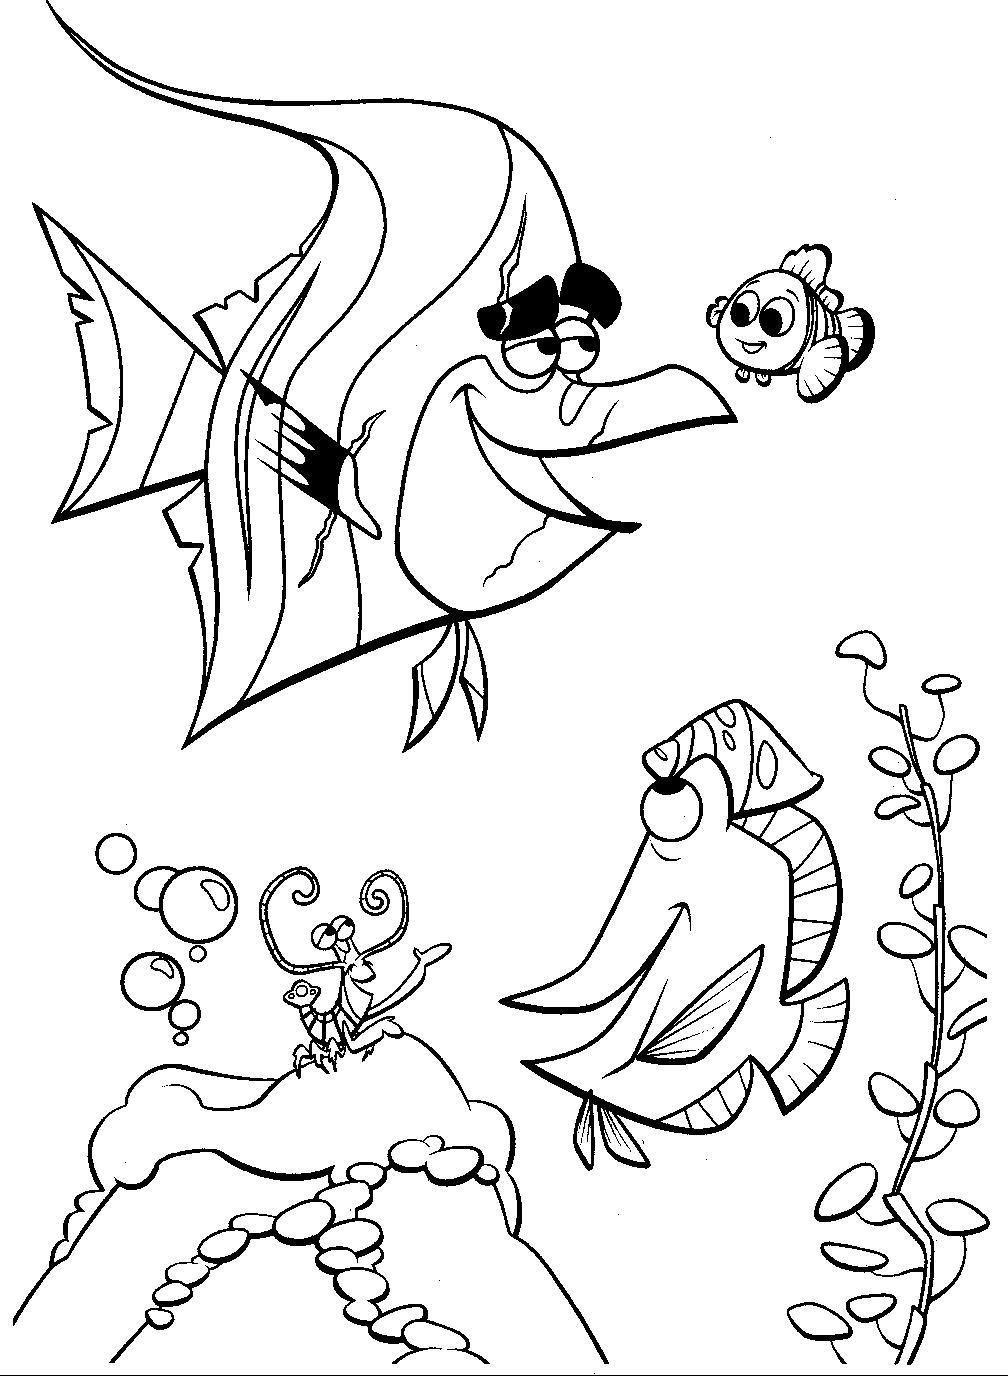 Krafty Kidz Center: Finding Nemo Coloring Pages